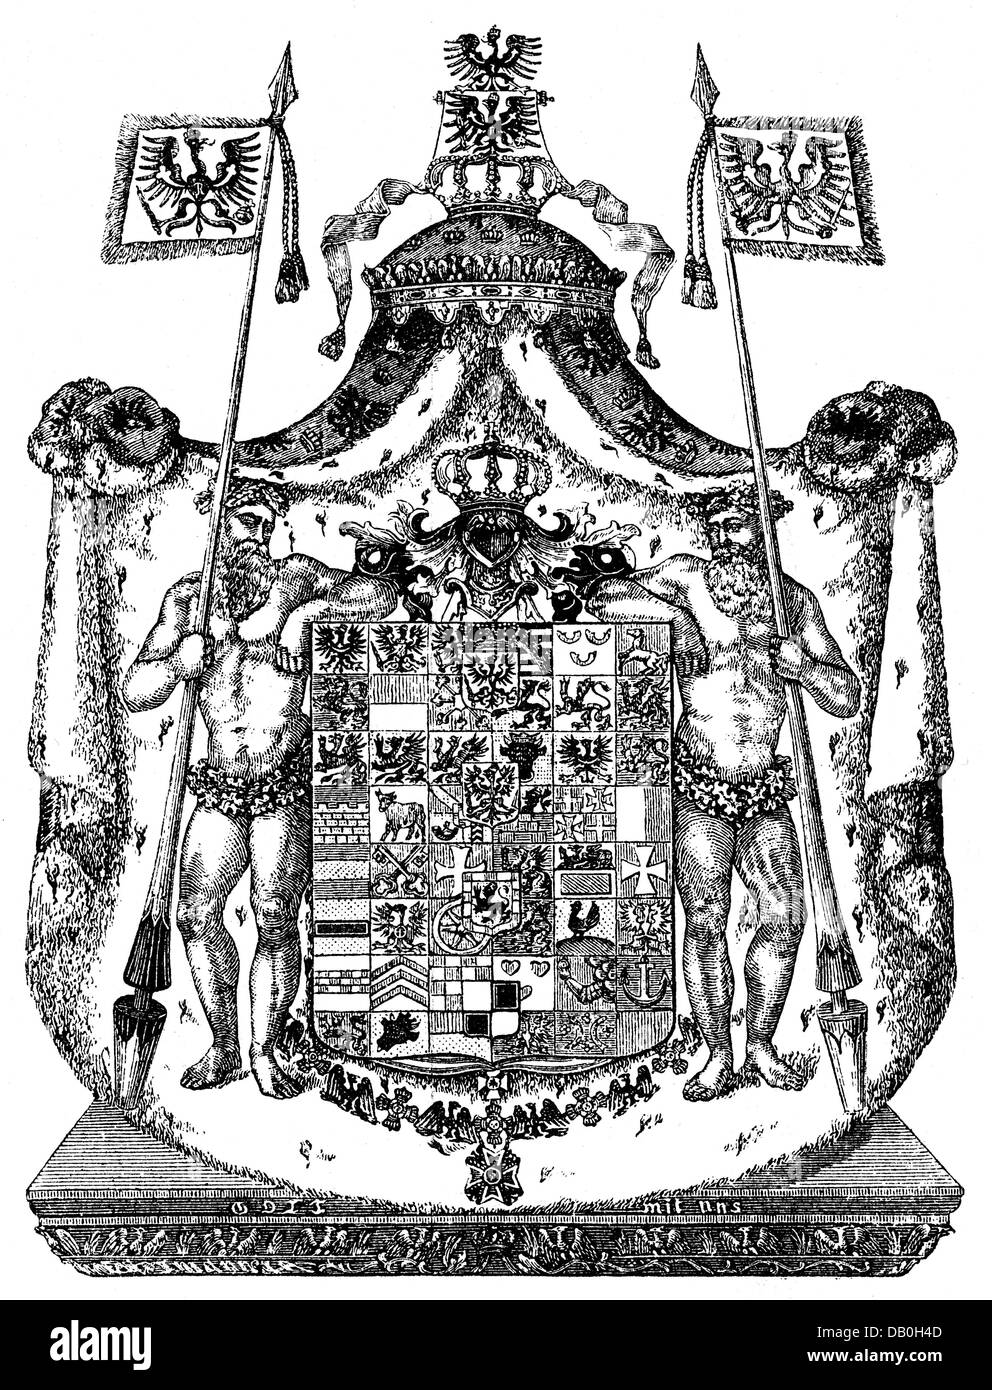 heraldry, coat of arms, Germany, great state coat of arms of the Kingdom of Prussia, 1873, Additional-Rights-Clearences-Not Available Stock Photo